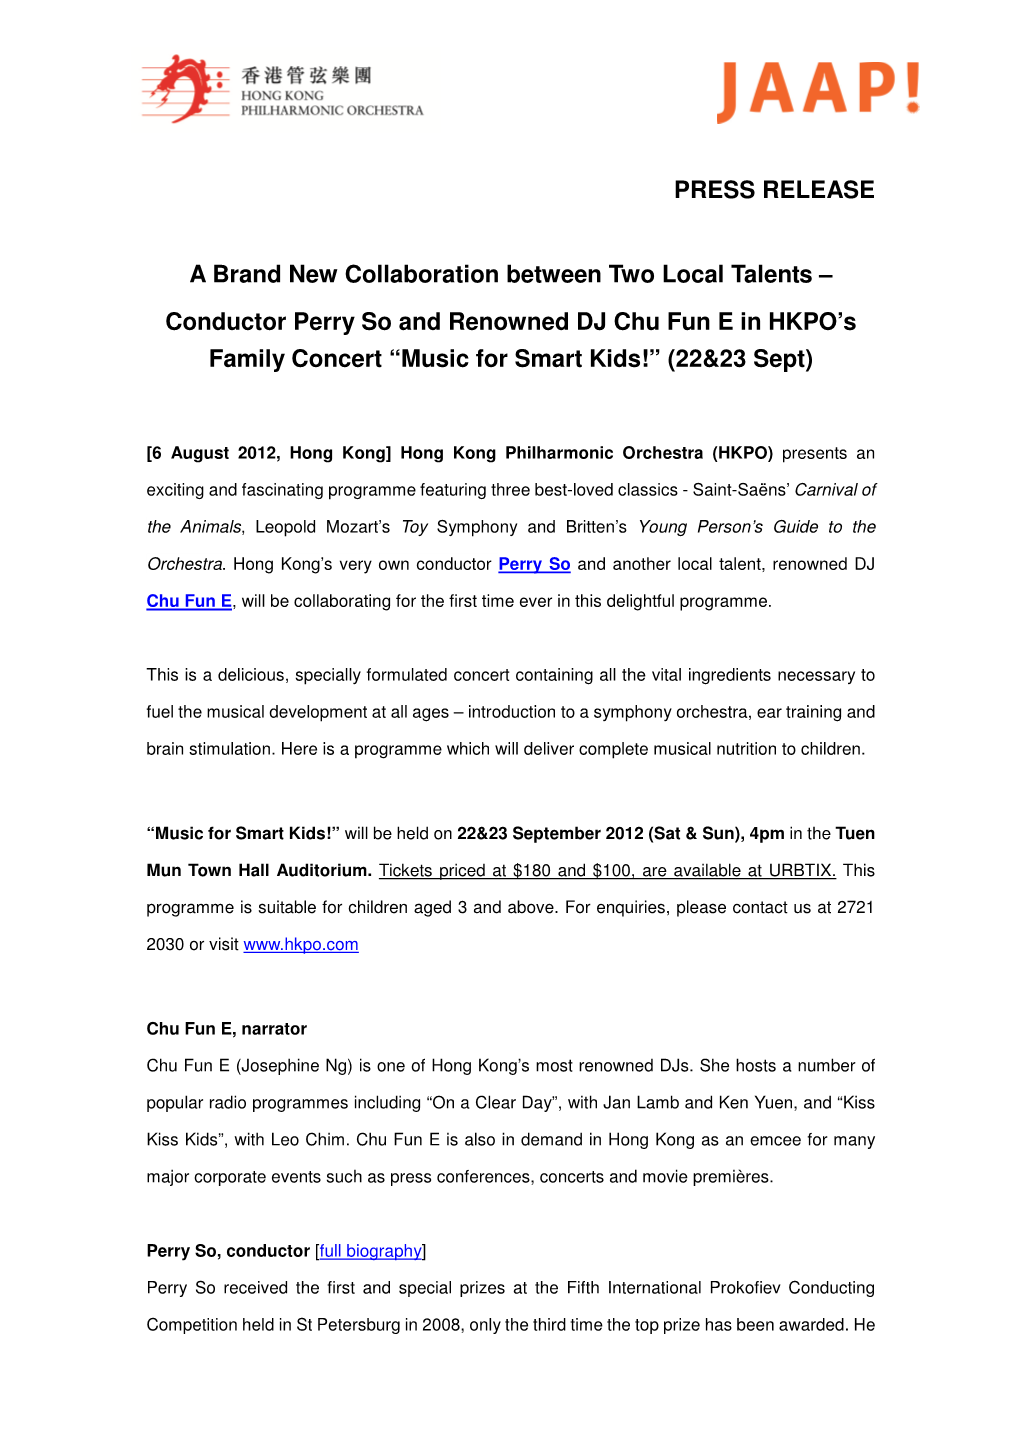 PRESS RELEASE a Brand New Collaboration Between Two Local